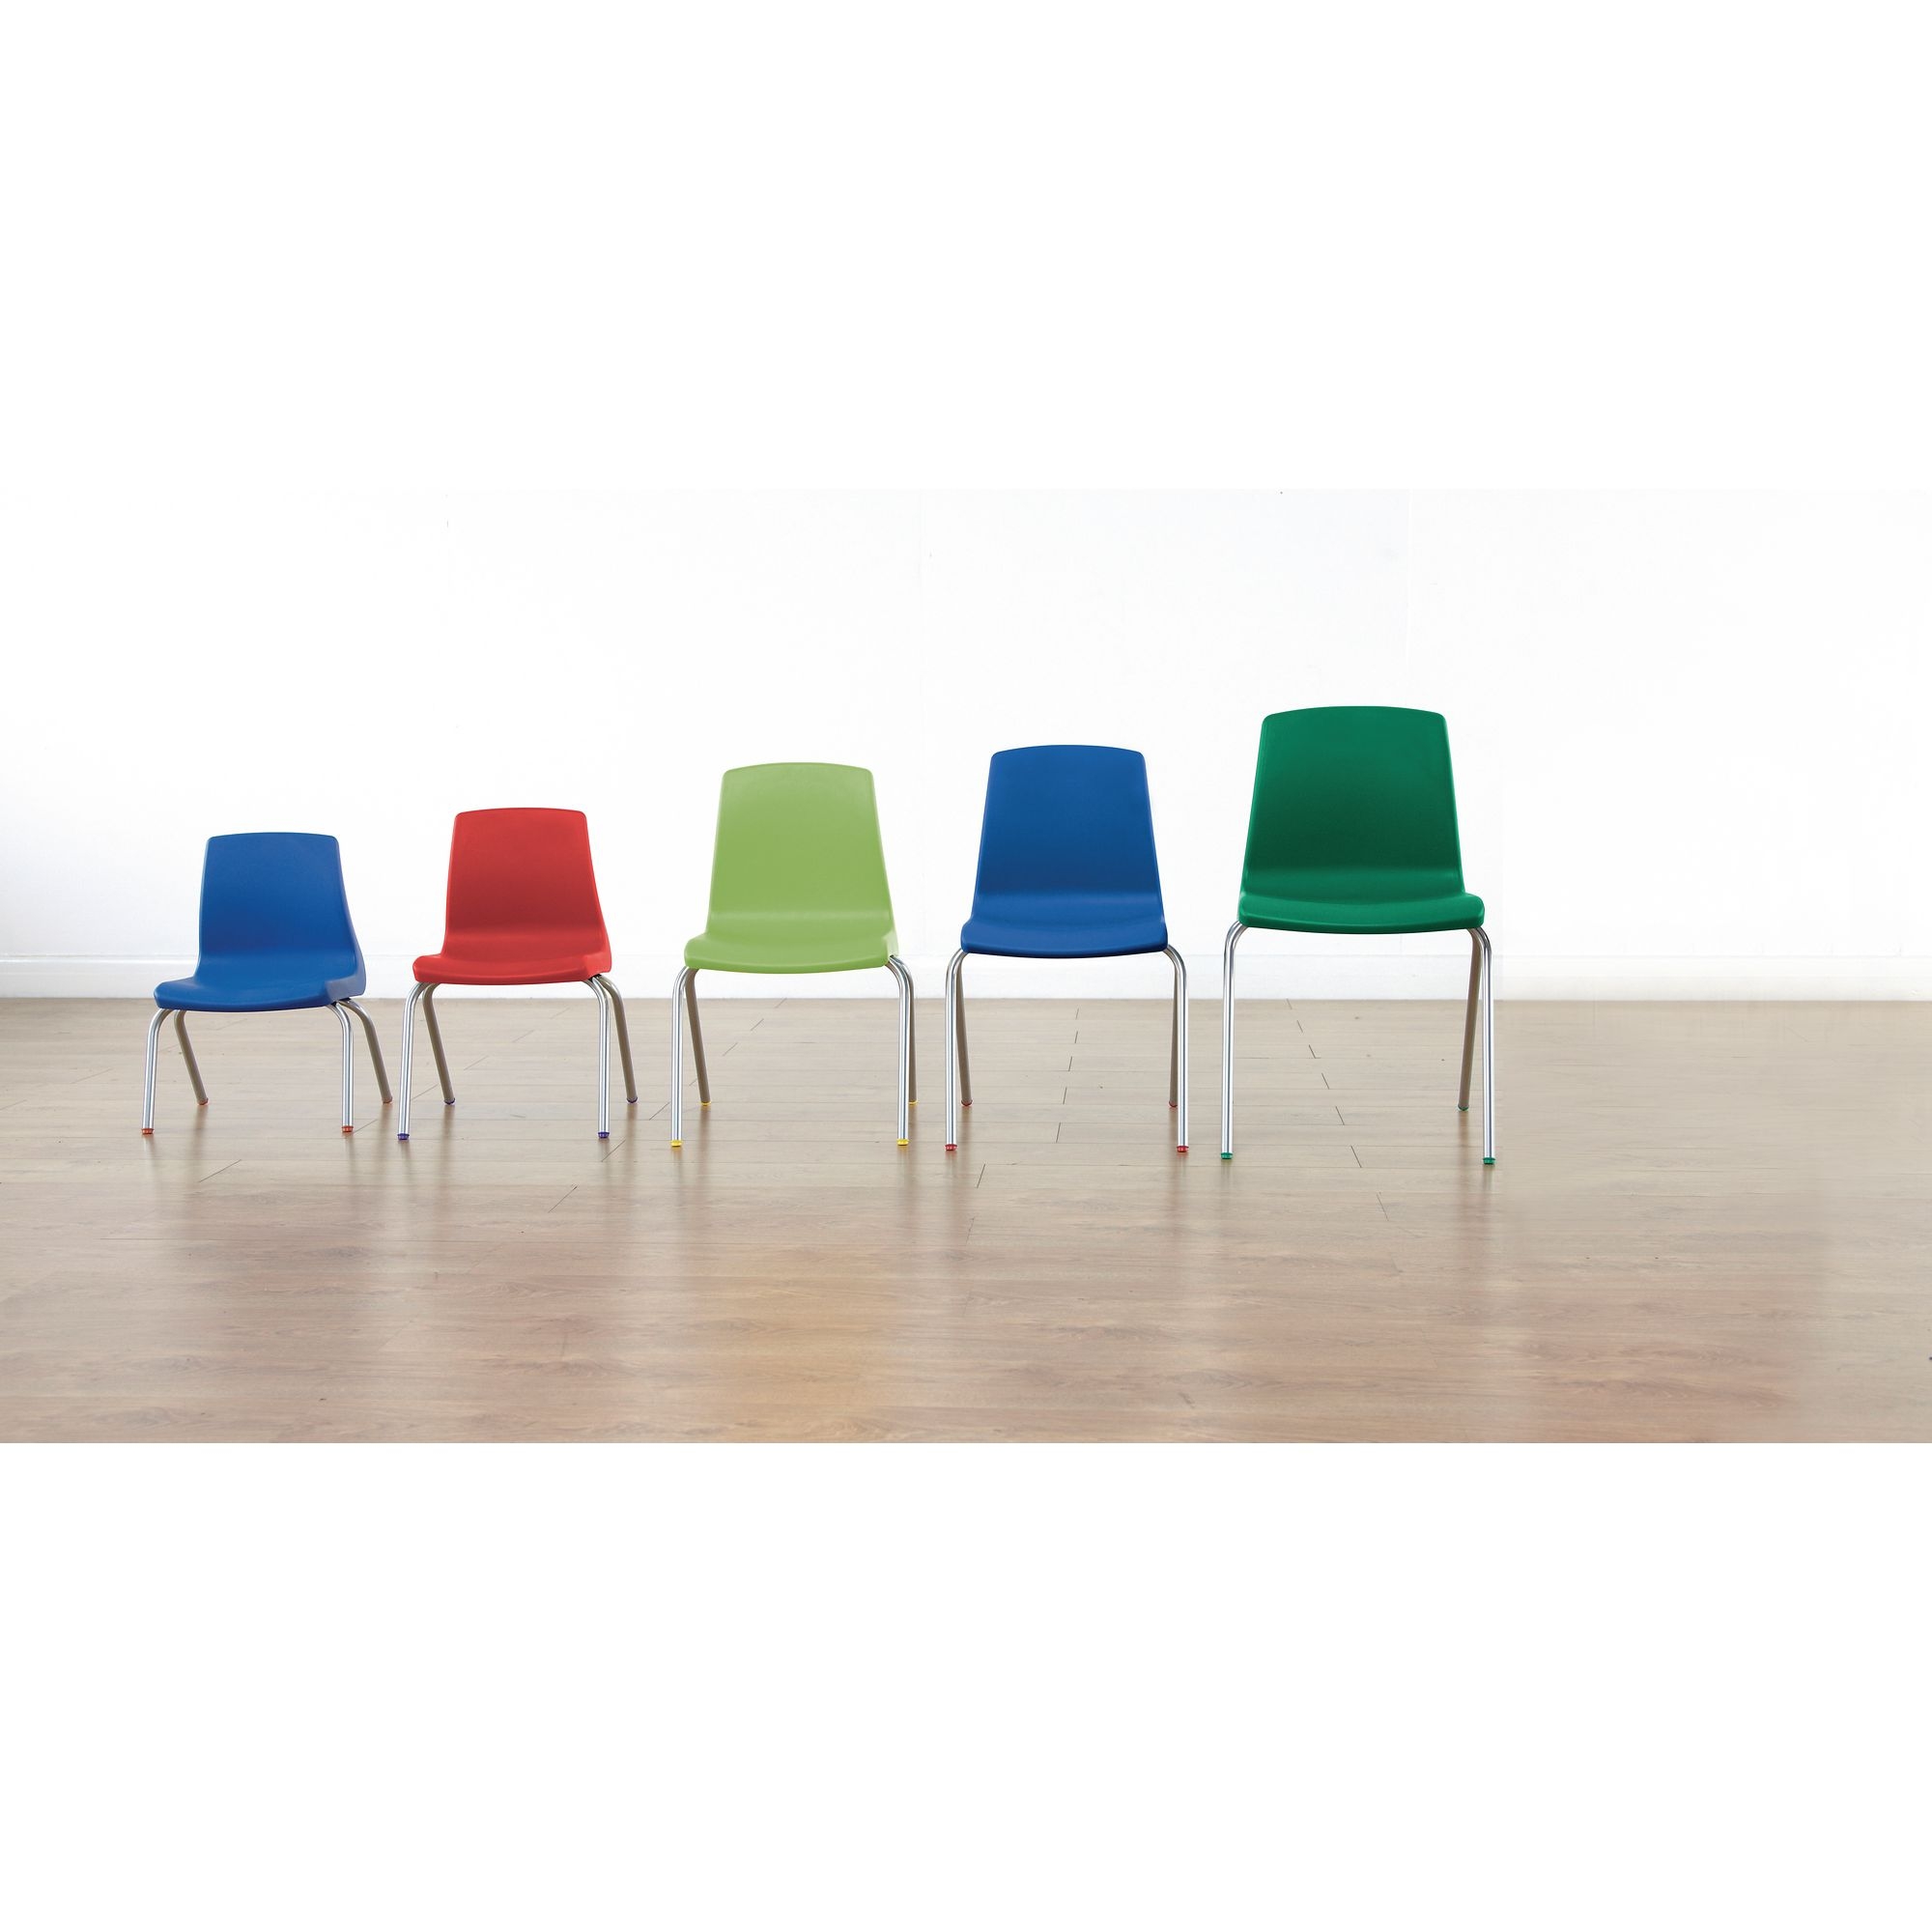 NP Chair - Size D - 380mm - Green